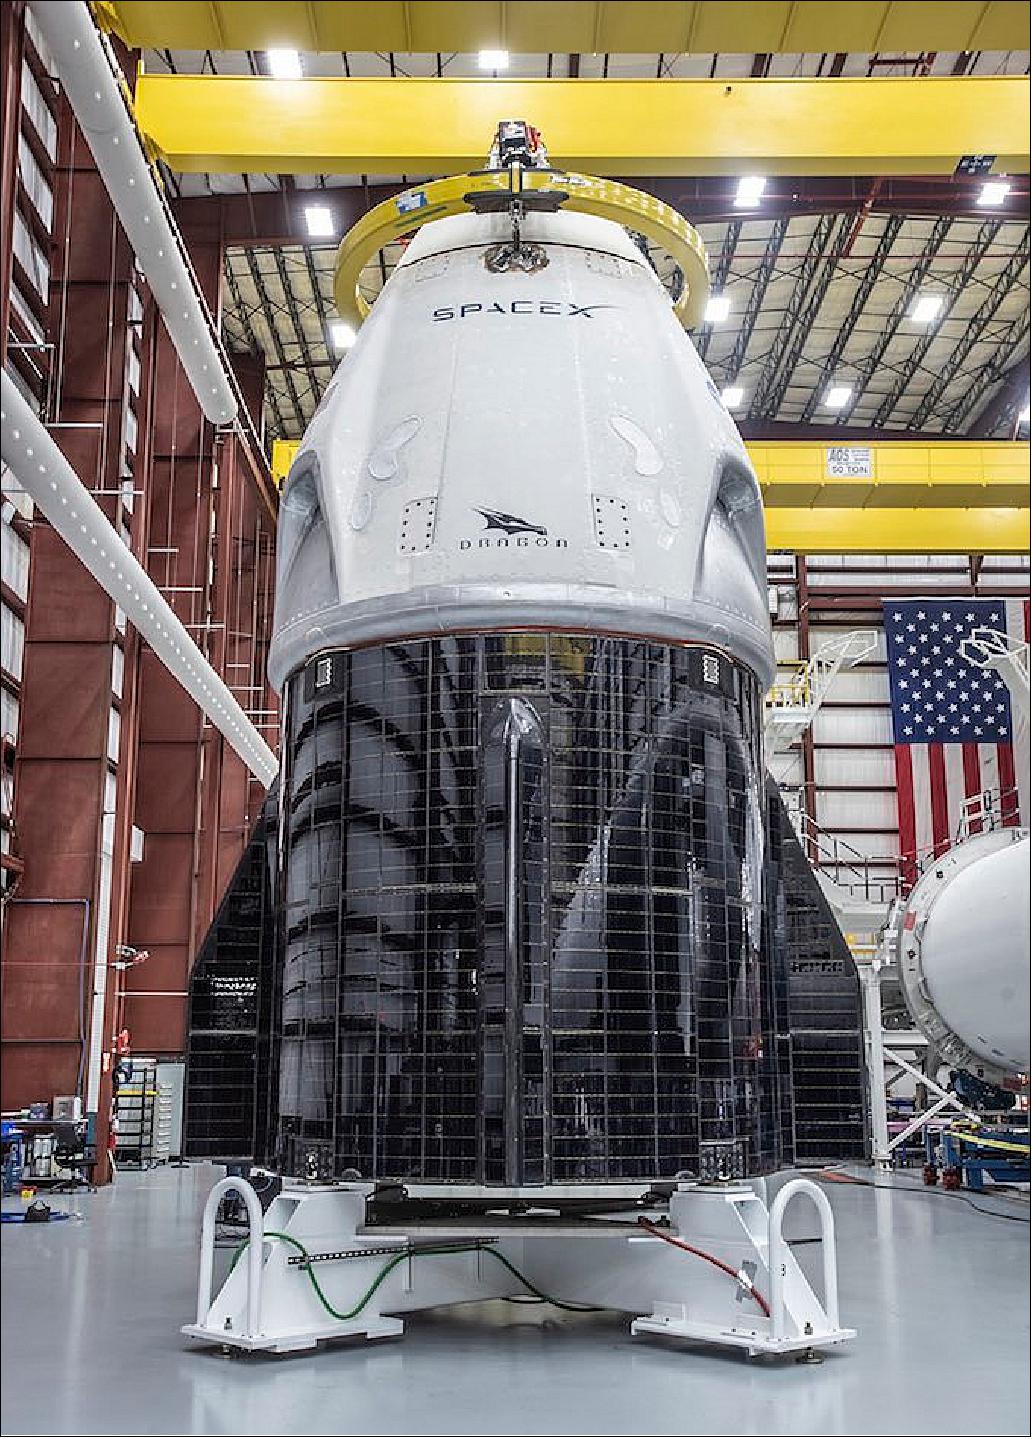 Figure 28: The Crew Dragon spacecraft inside SpaceX’s hangar at NASA’s Kennedy Space Center in Florida (image credit: SpaceX)